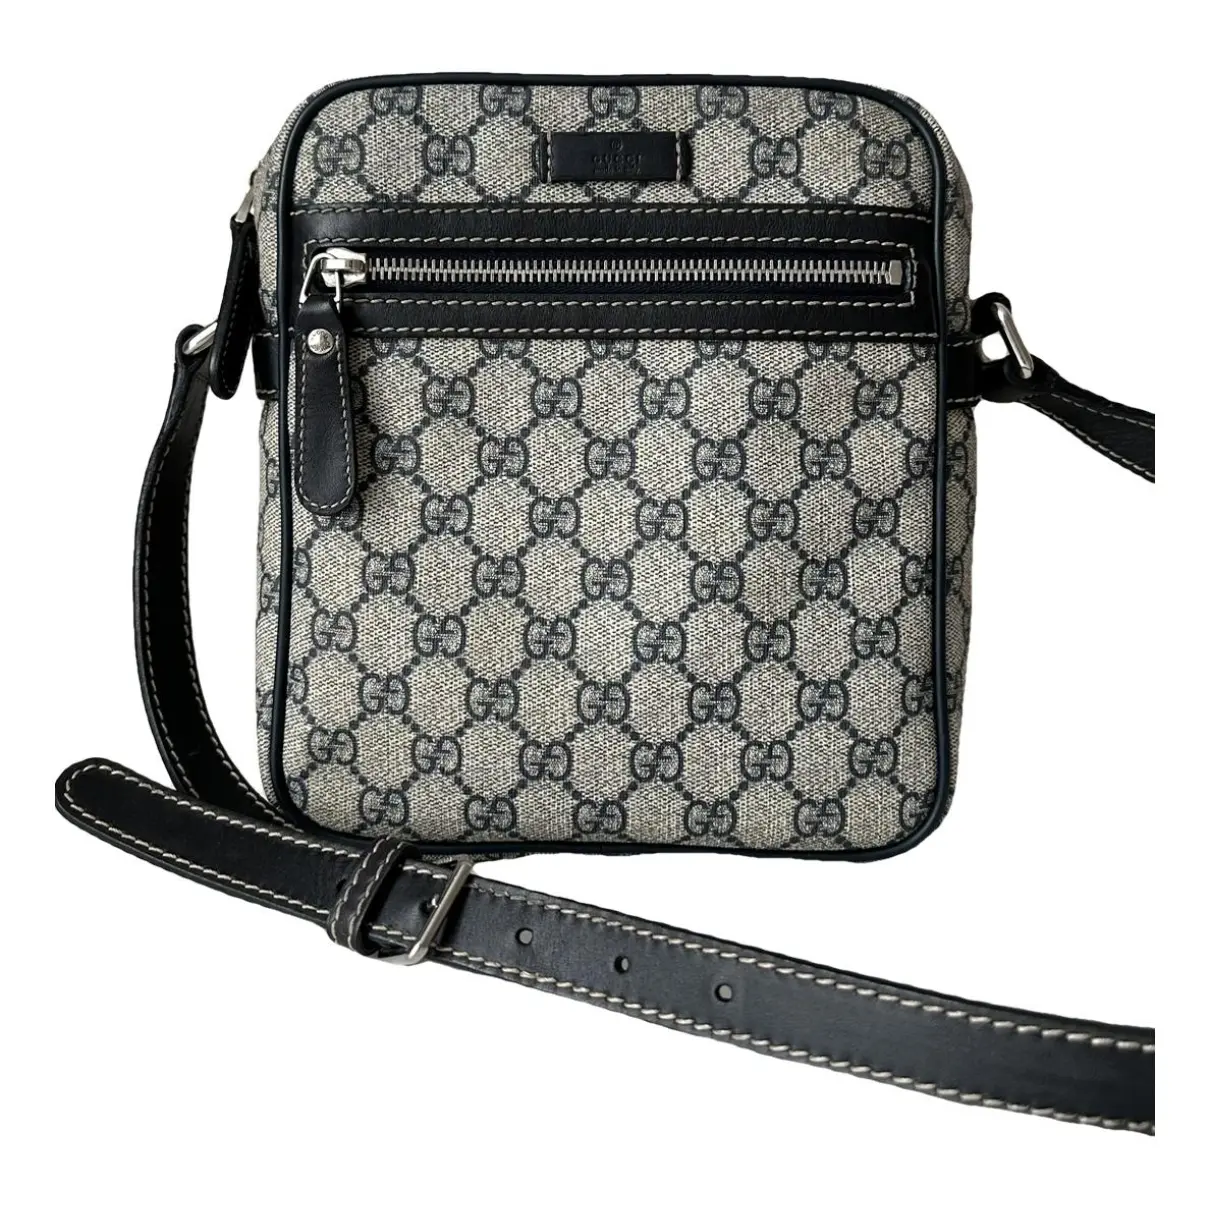 GG Marmont Zip Messenger leather crossbody bag Gucci